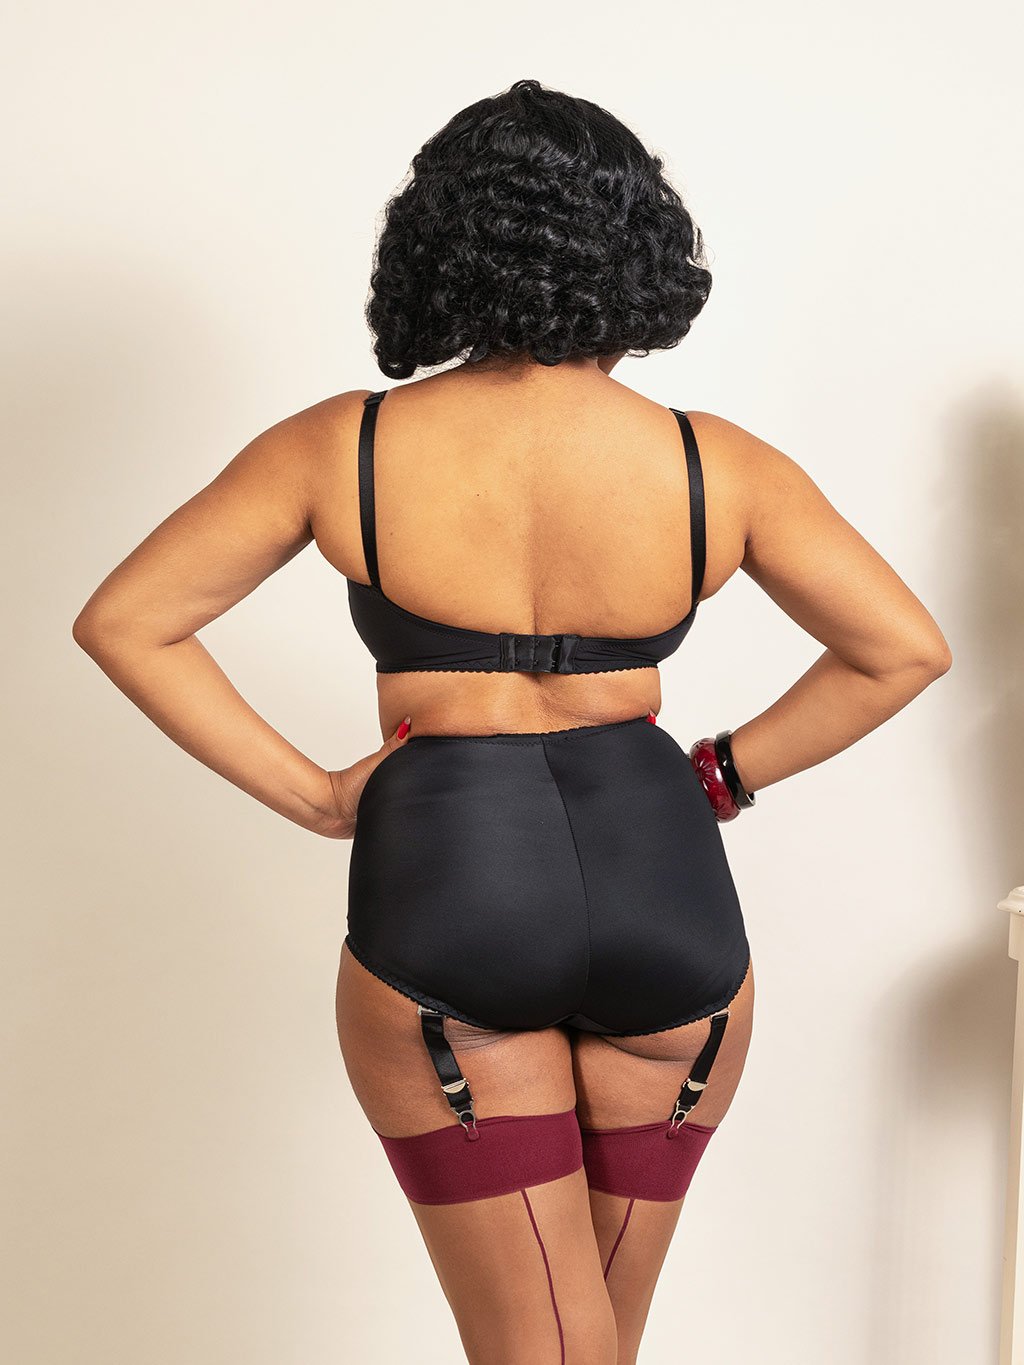 Liz Suspender Knickers by What Katie Did. Vintage inspired black high waisted knickers with 4 detachable suspender straps so that they can be worn with or without stockings.